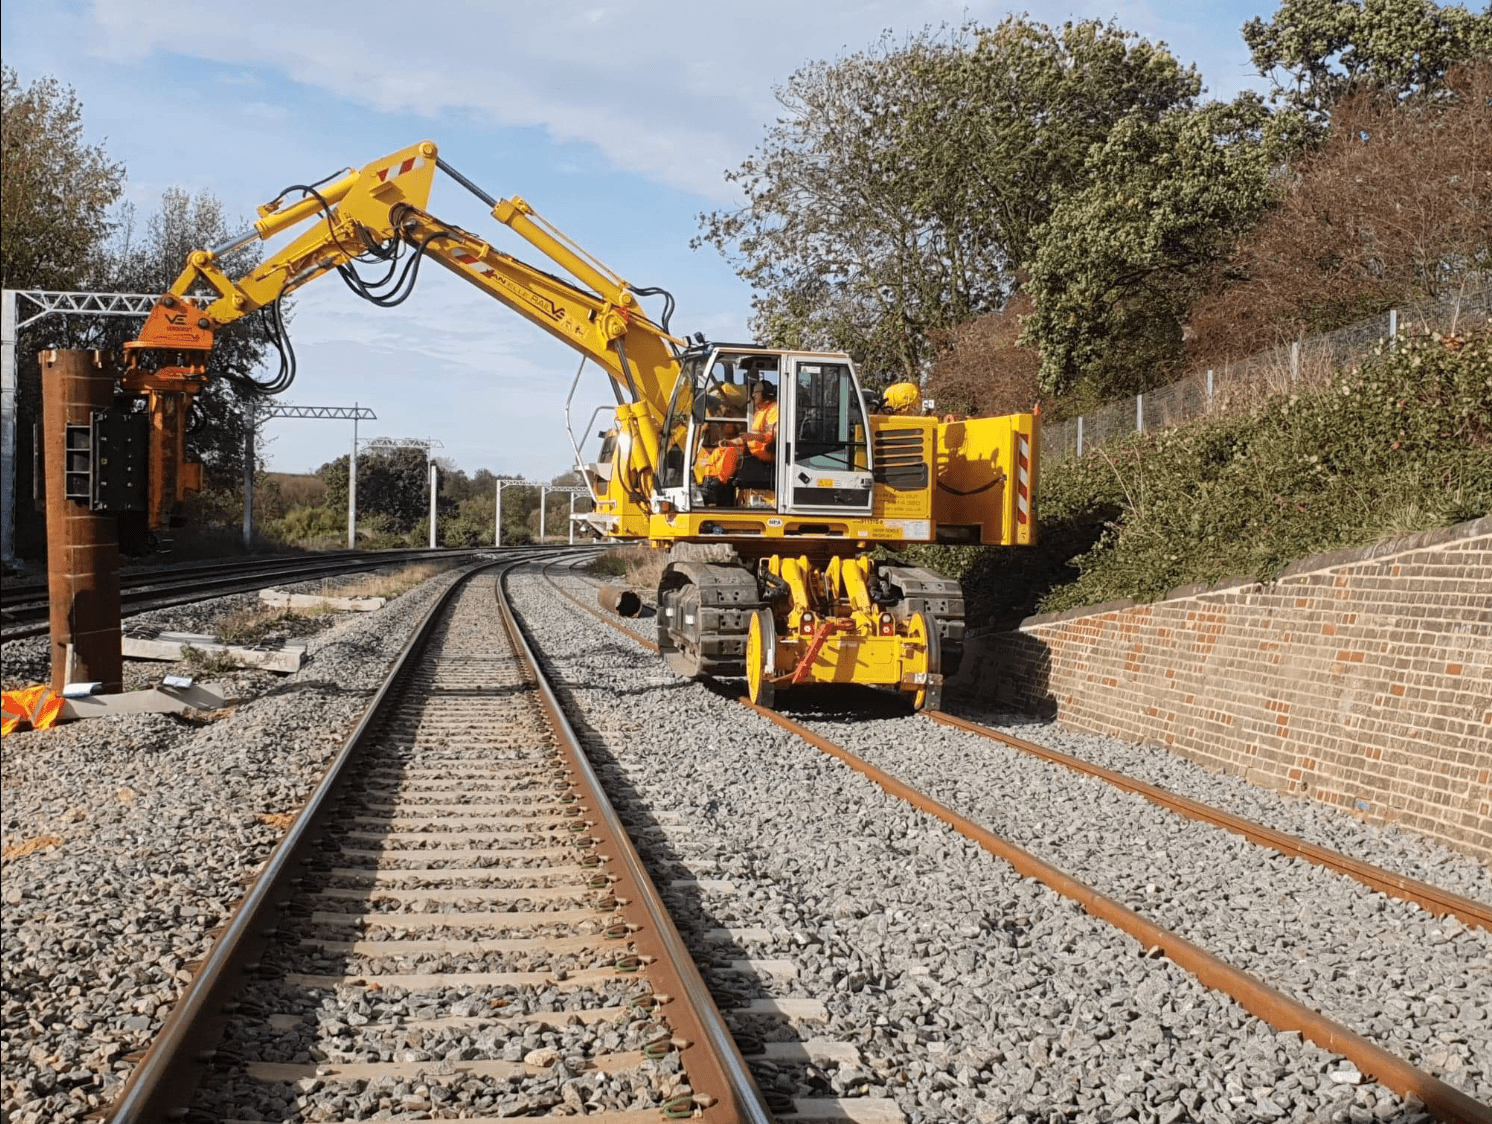 Tracked Colmar T10,000 is back in service following an extensive upgrade